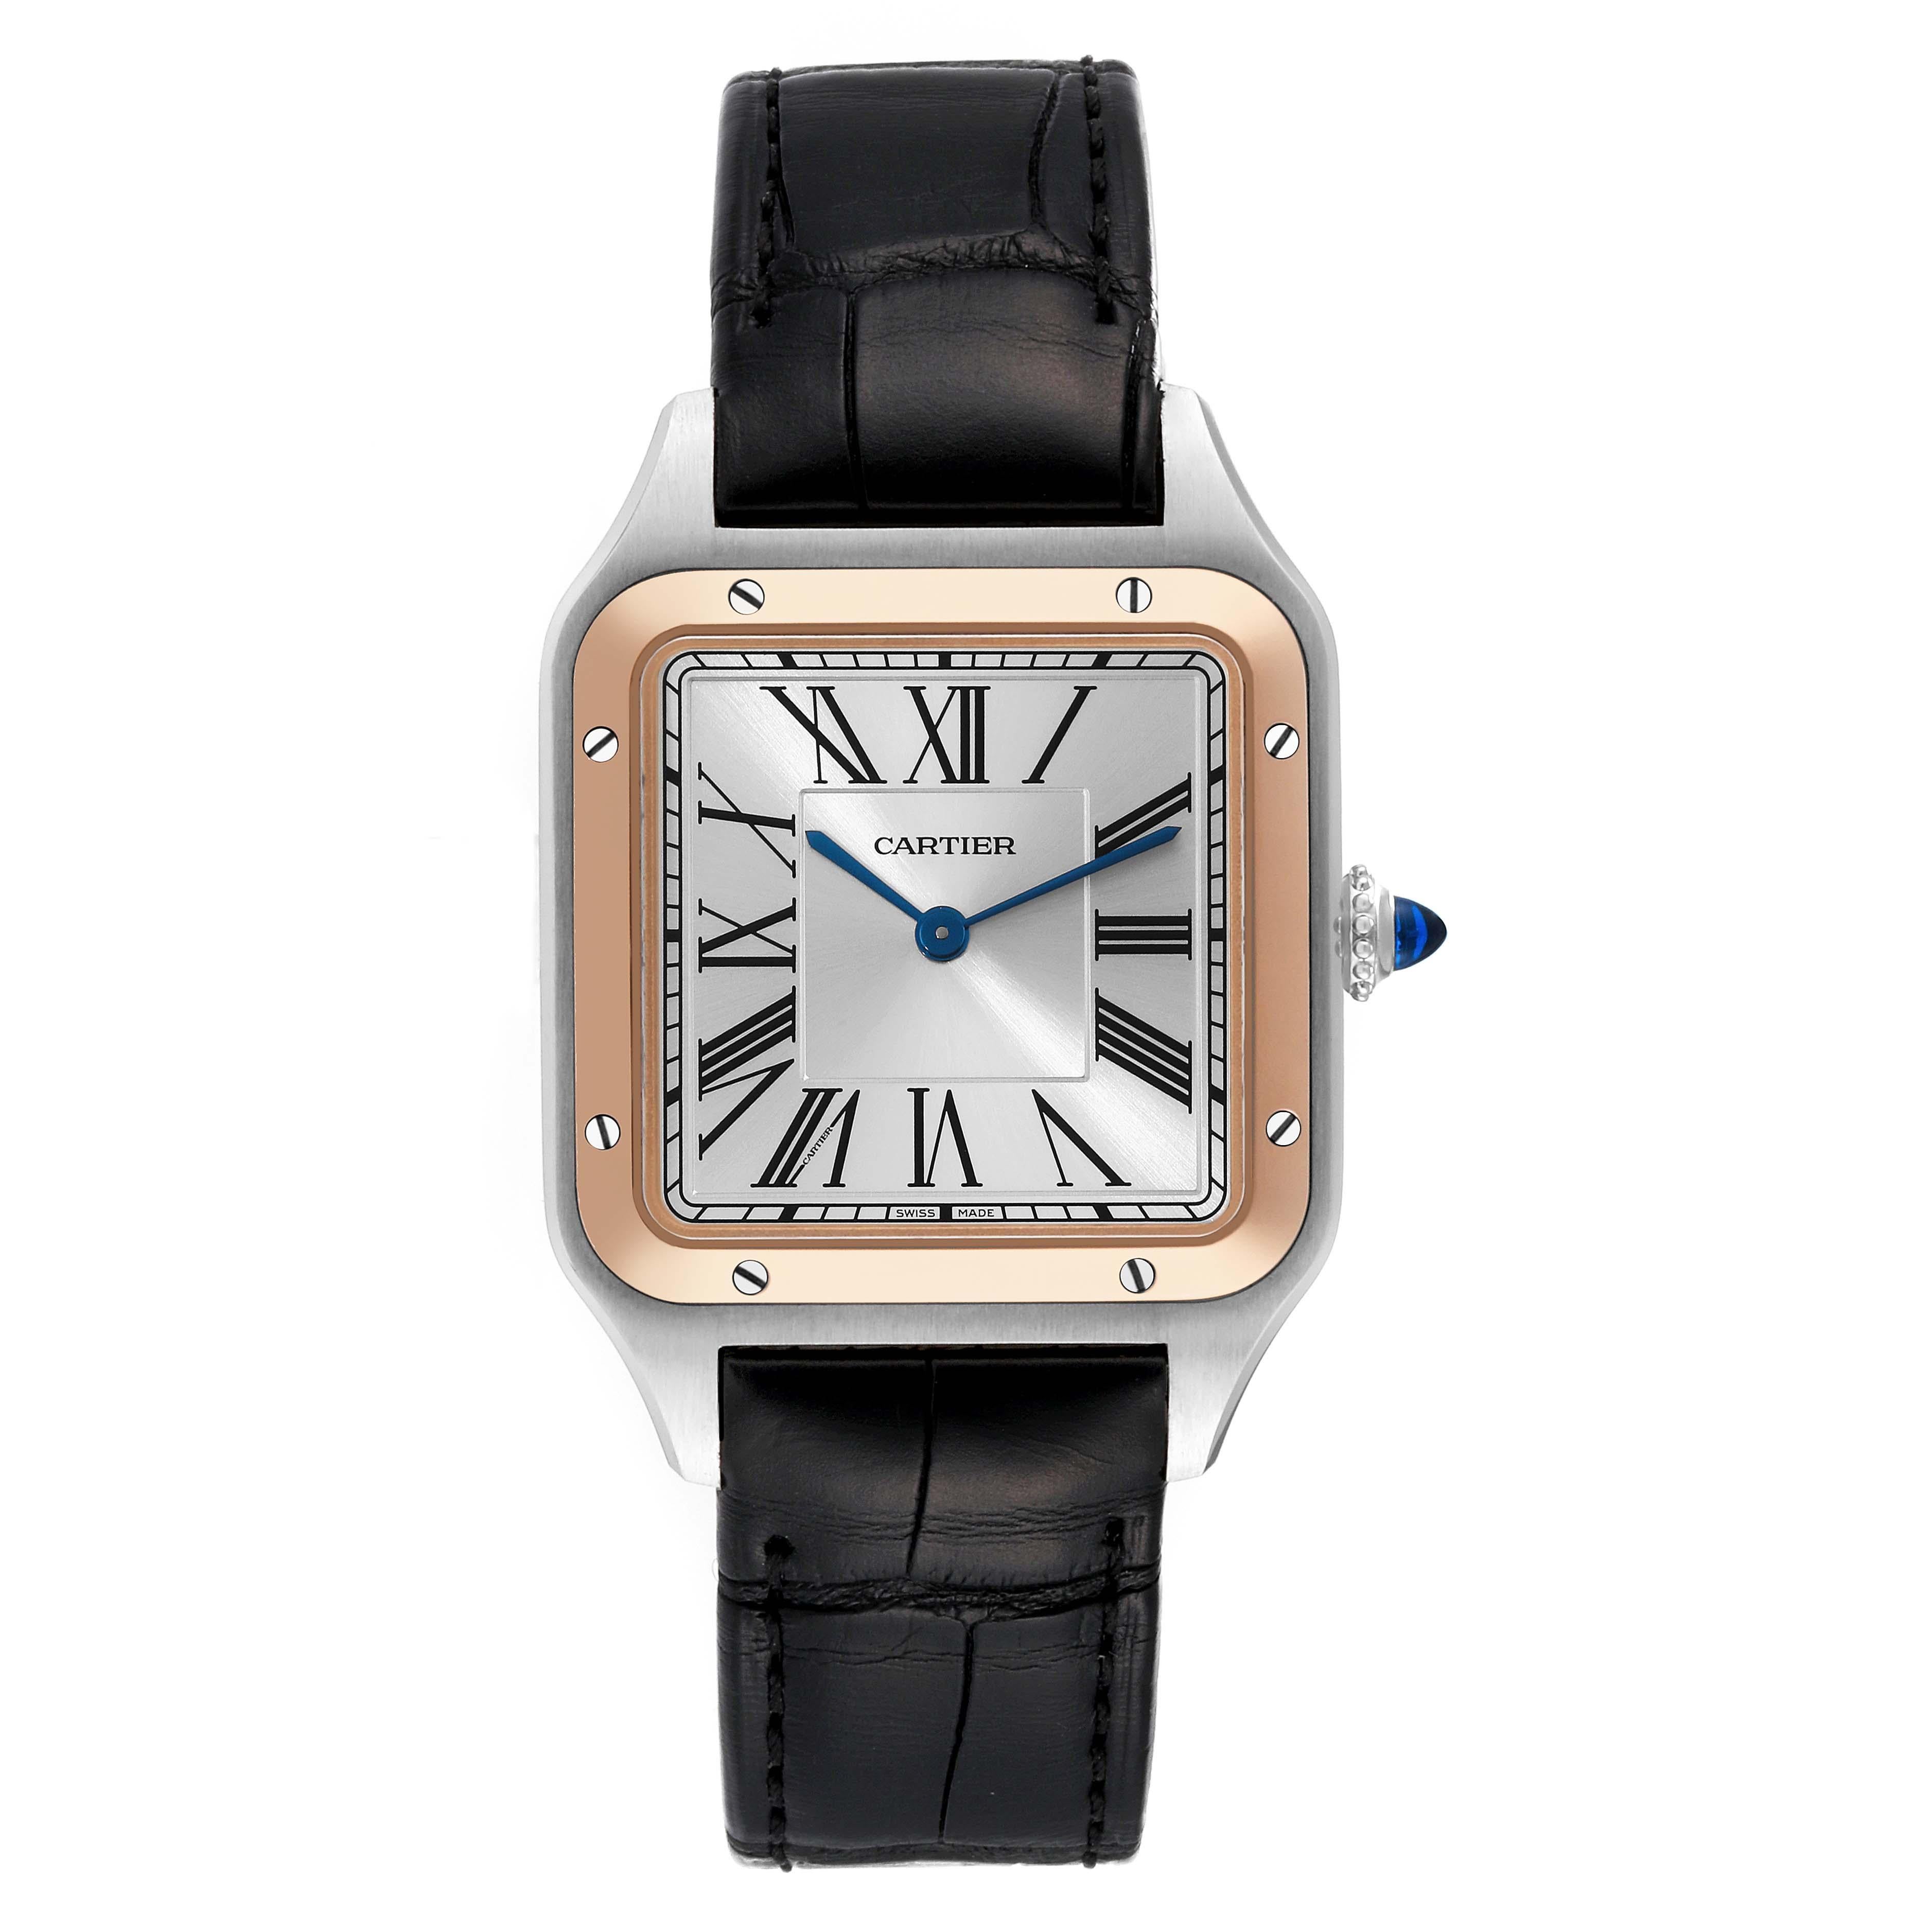 Cartier Santos Dumont Large Steel Rose Gold Mens Watch W2SA0011 Box Card. Quartz movement. Stainless steel case 43.5 mm x 31.4 mm. Case thickness 7.3 mm. Circular grained crown set with blue spinel cabochon. 18k rose gold bezel punctuated with 8